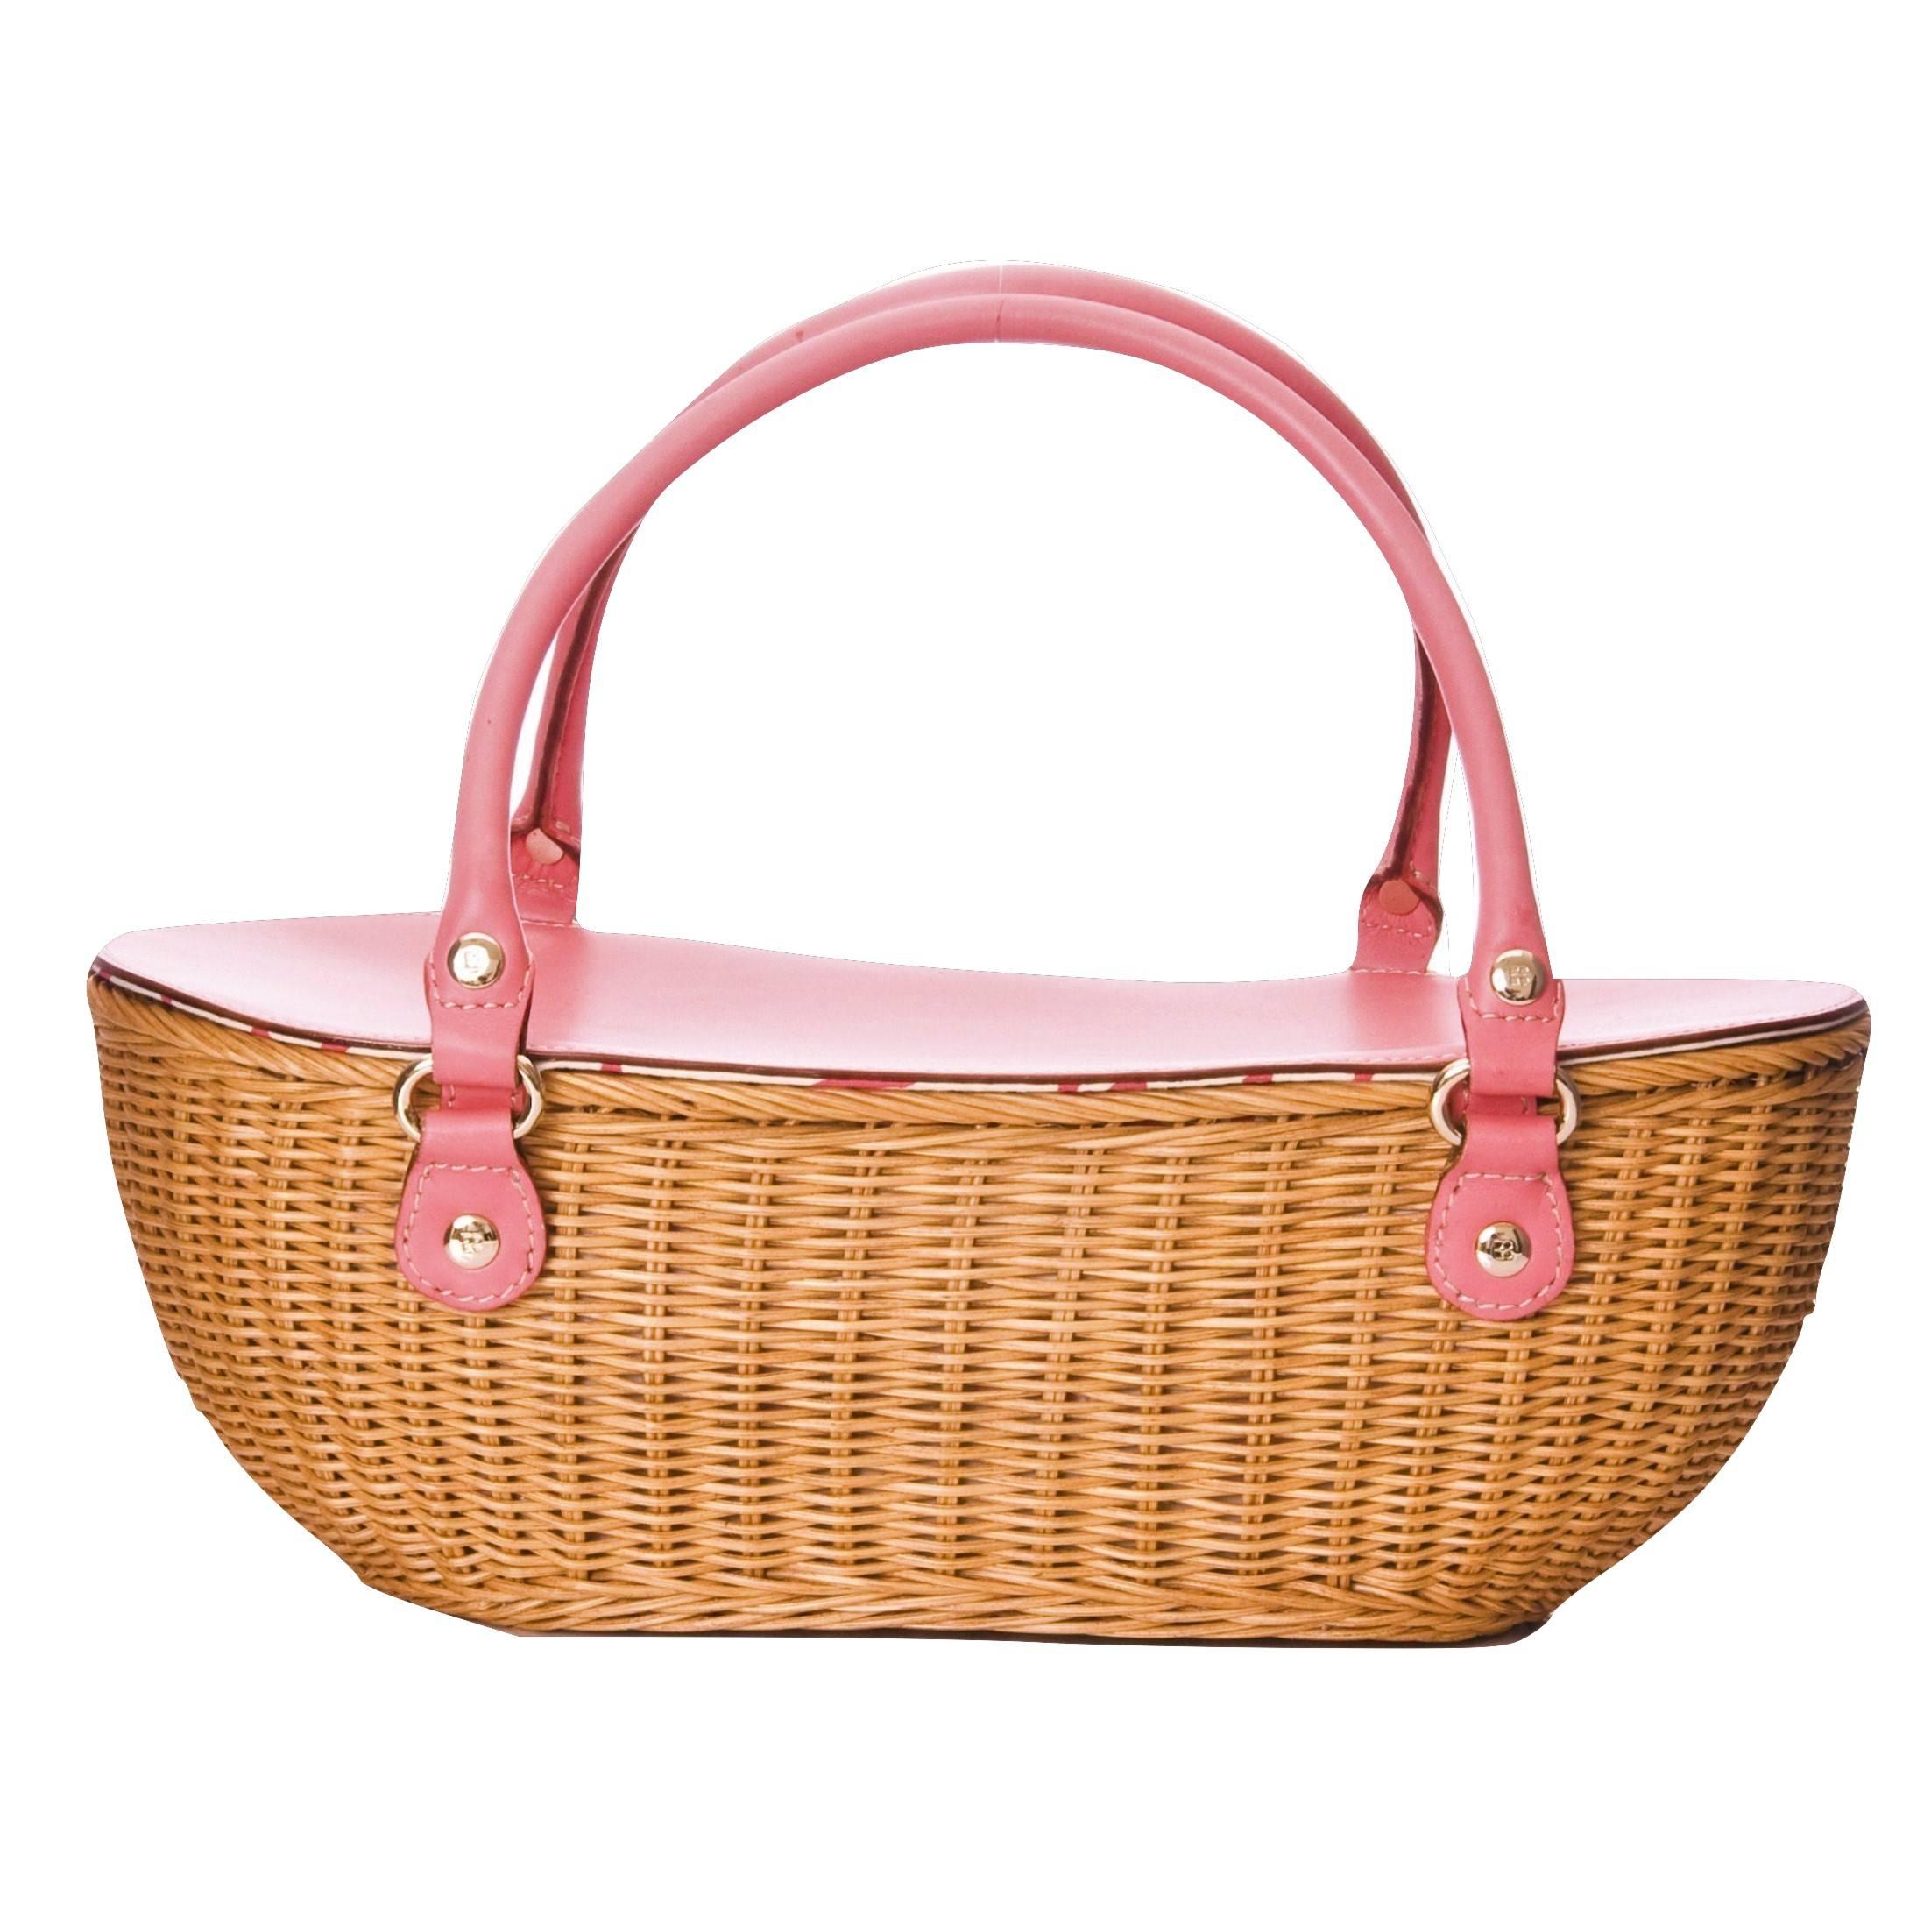 Women's New Kate Spade Spring 2005 Collection Pink Wicker Basket Bag